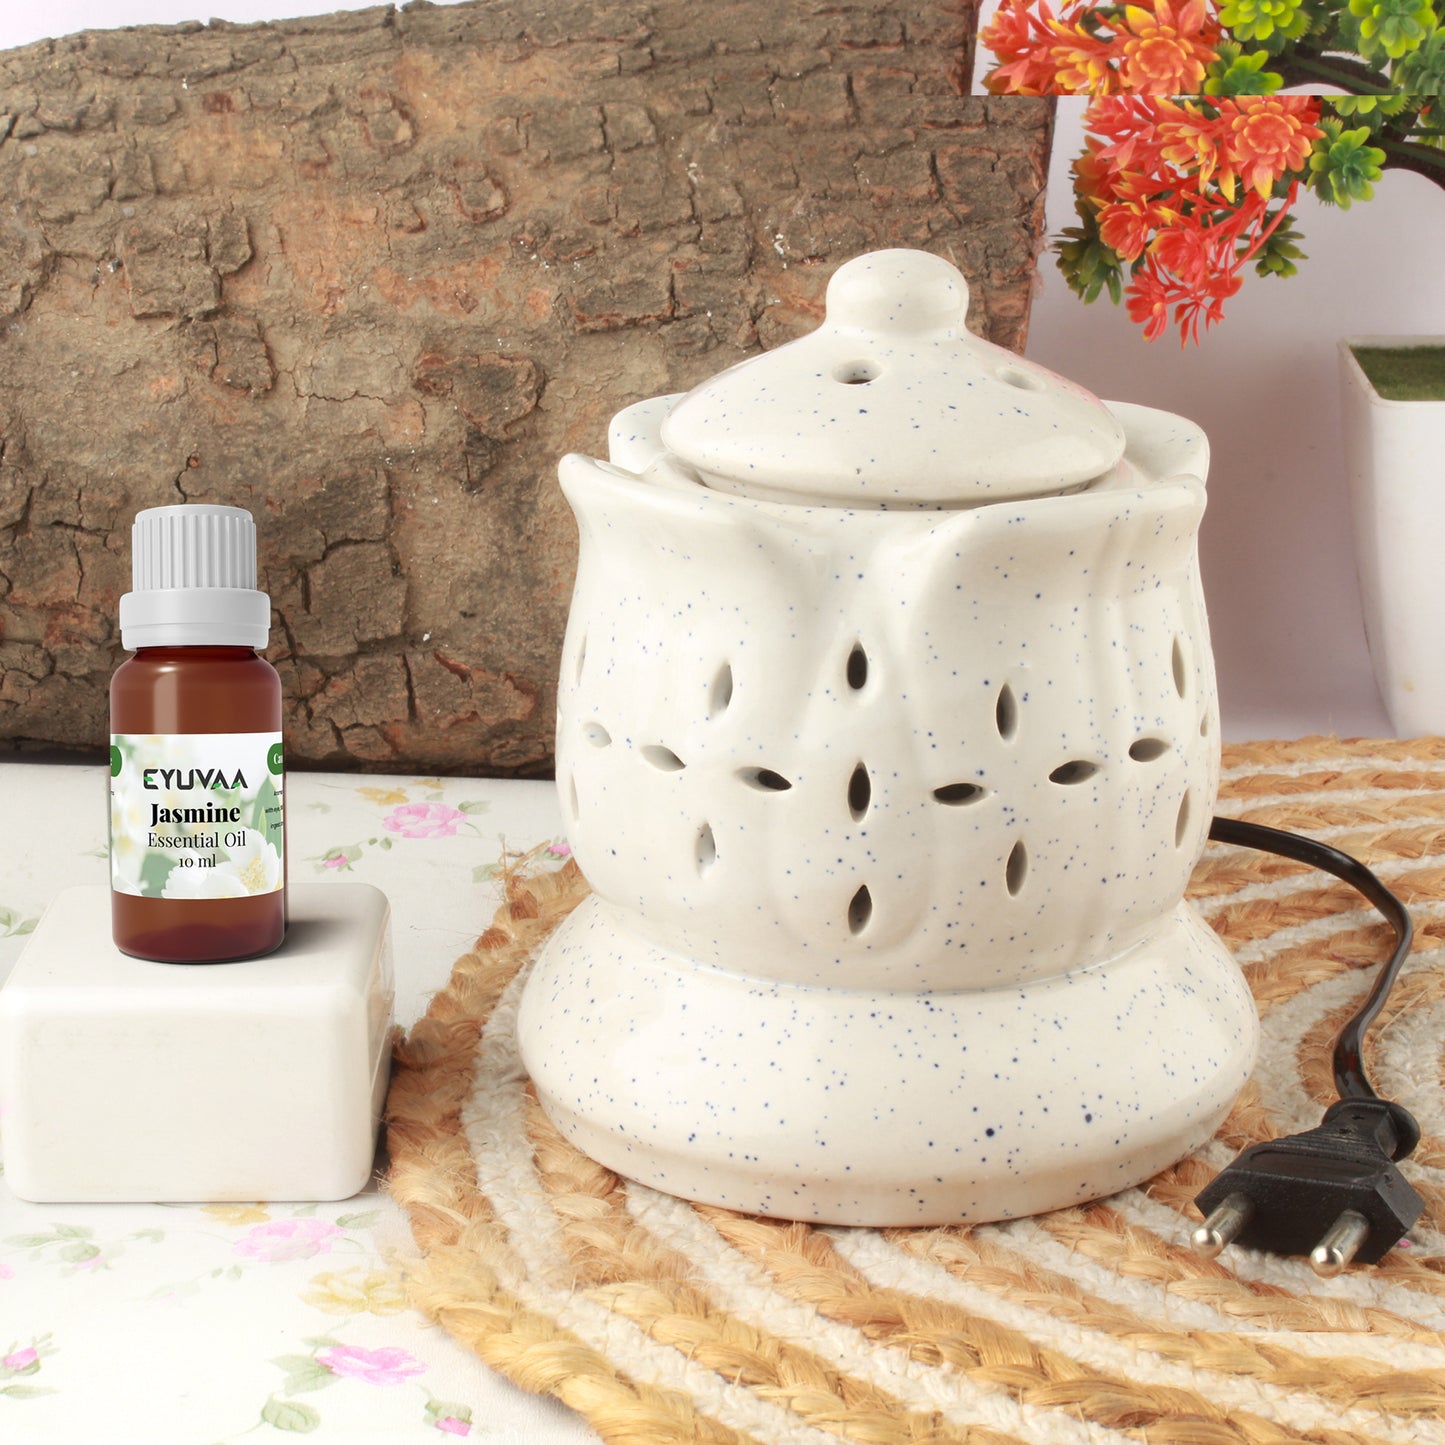 Kamal-shaped Aroma Electric Diffuser, Lotus shaped Diffuser,Aromatherapy Ceramic Diffuser Set for Home Fragrance with 10 ml Aroma Oil